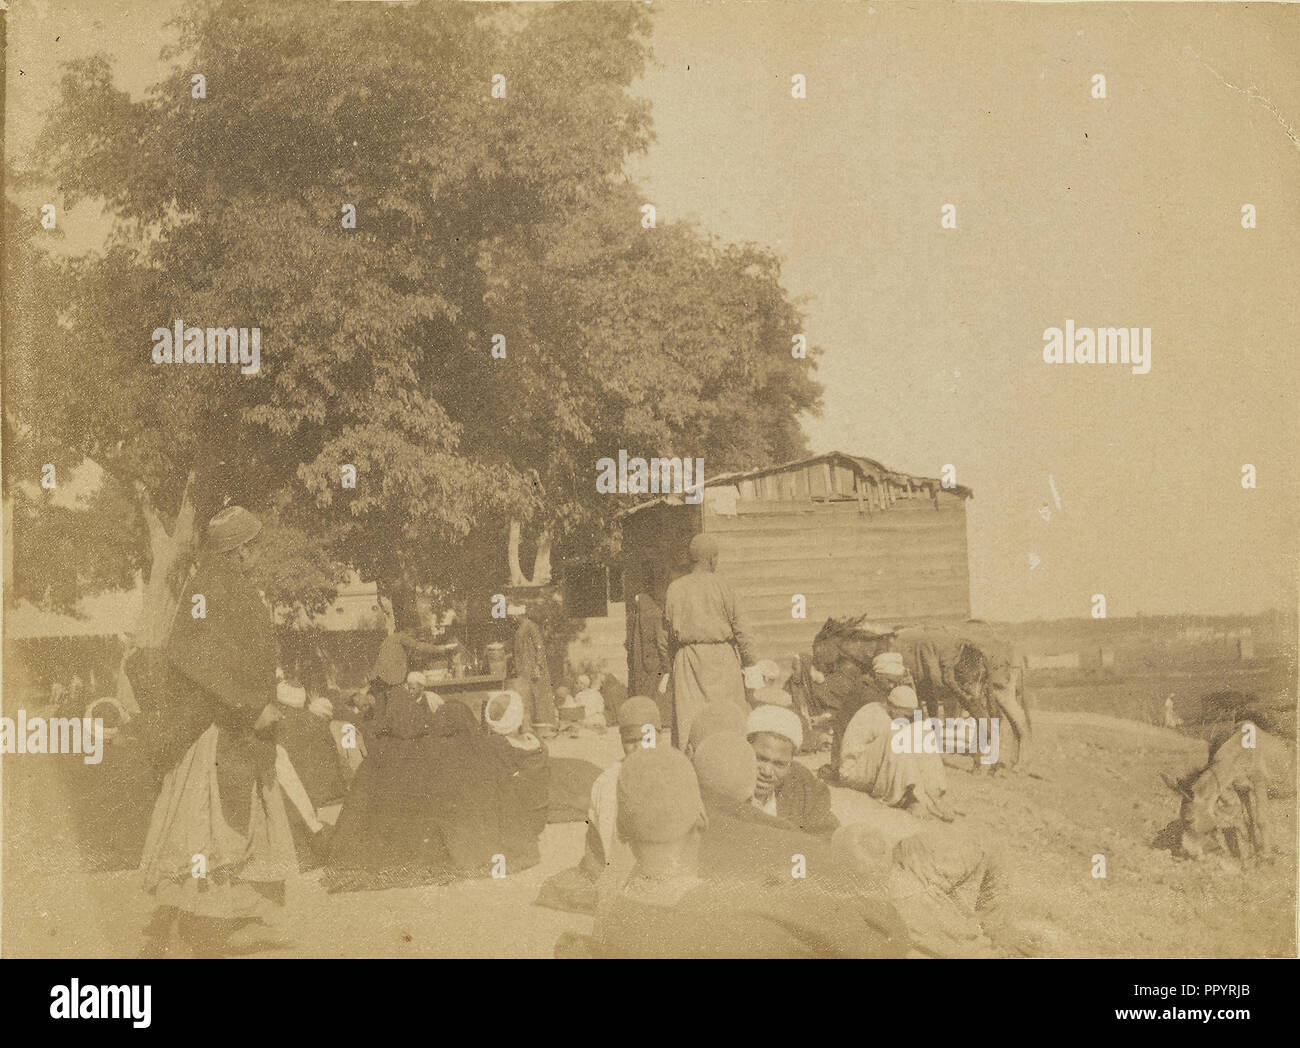 People gathered outdoors; about 1860 - 1880; Tinted Albumen silver print Stock Photo